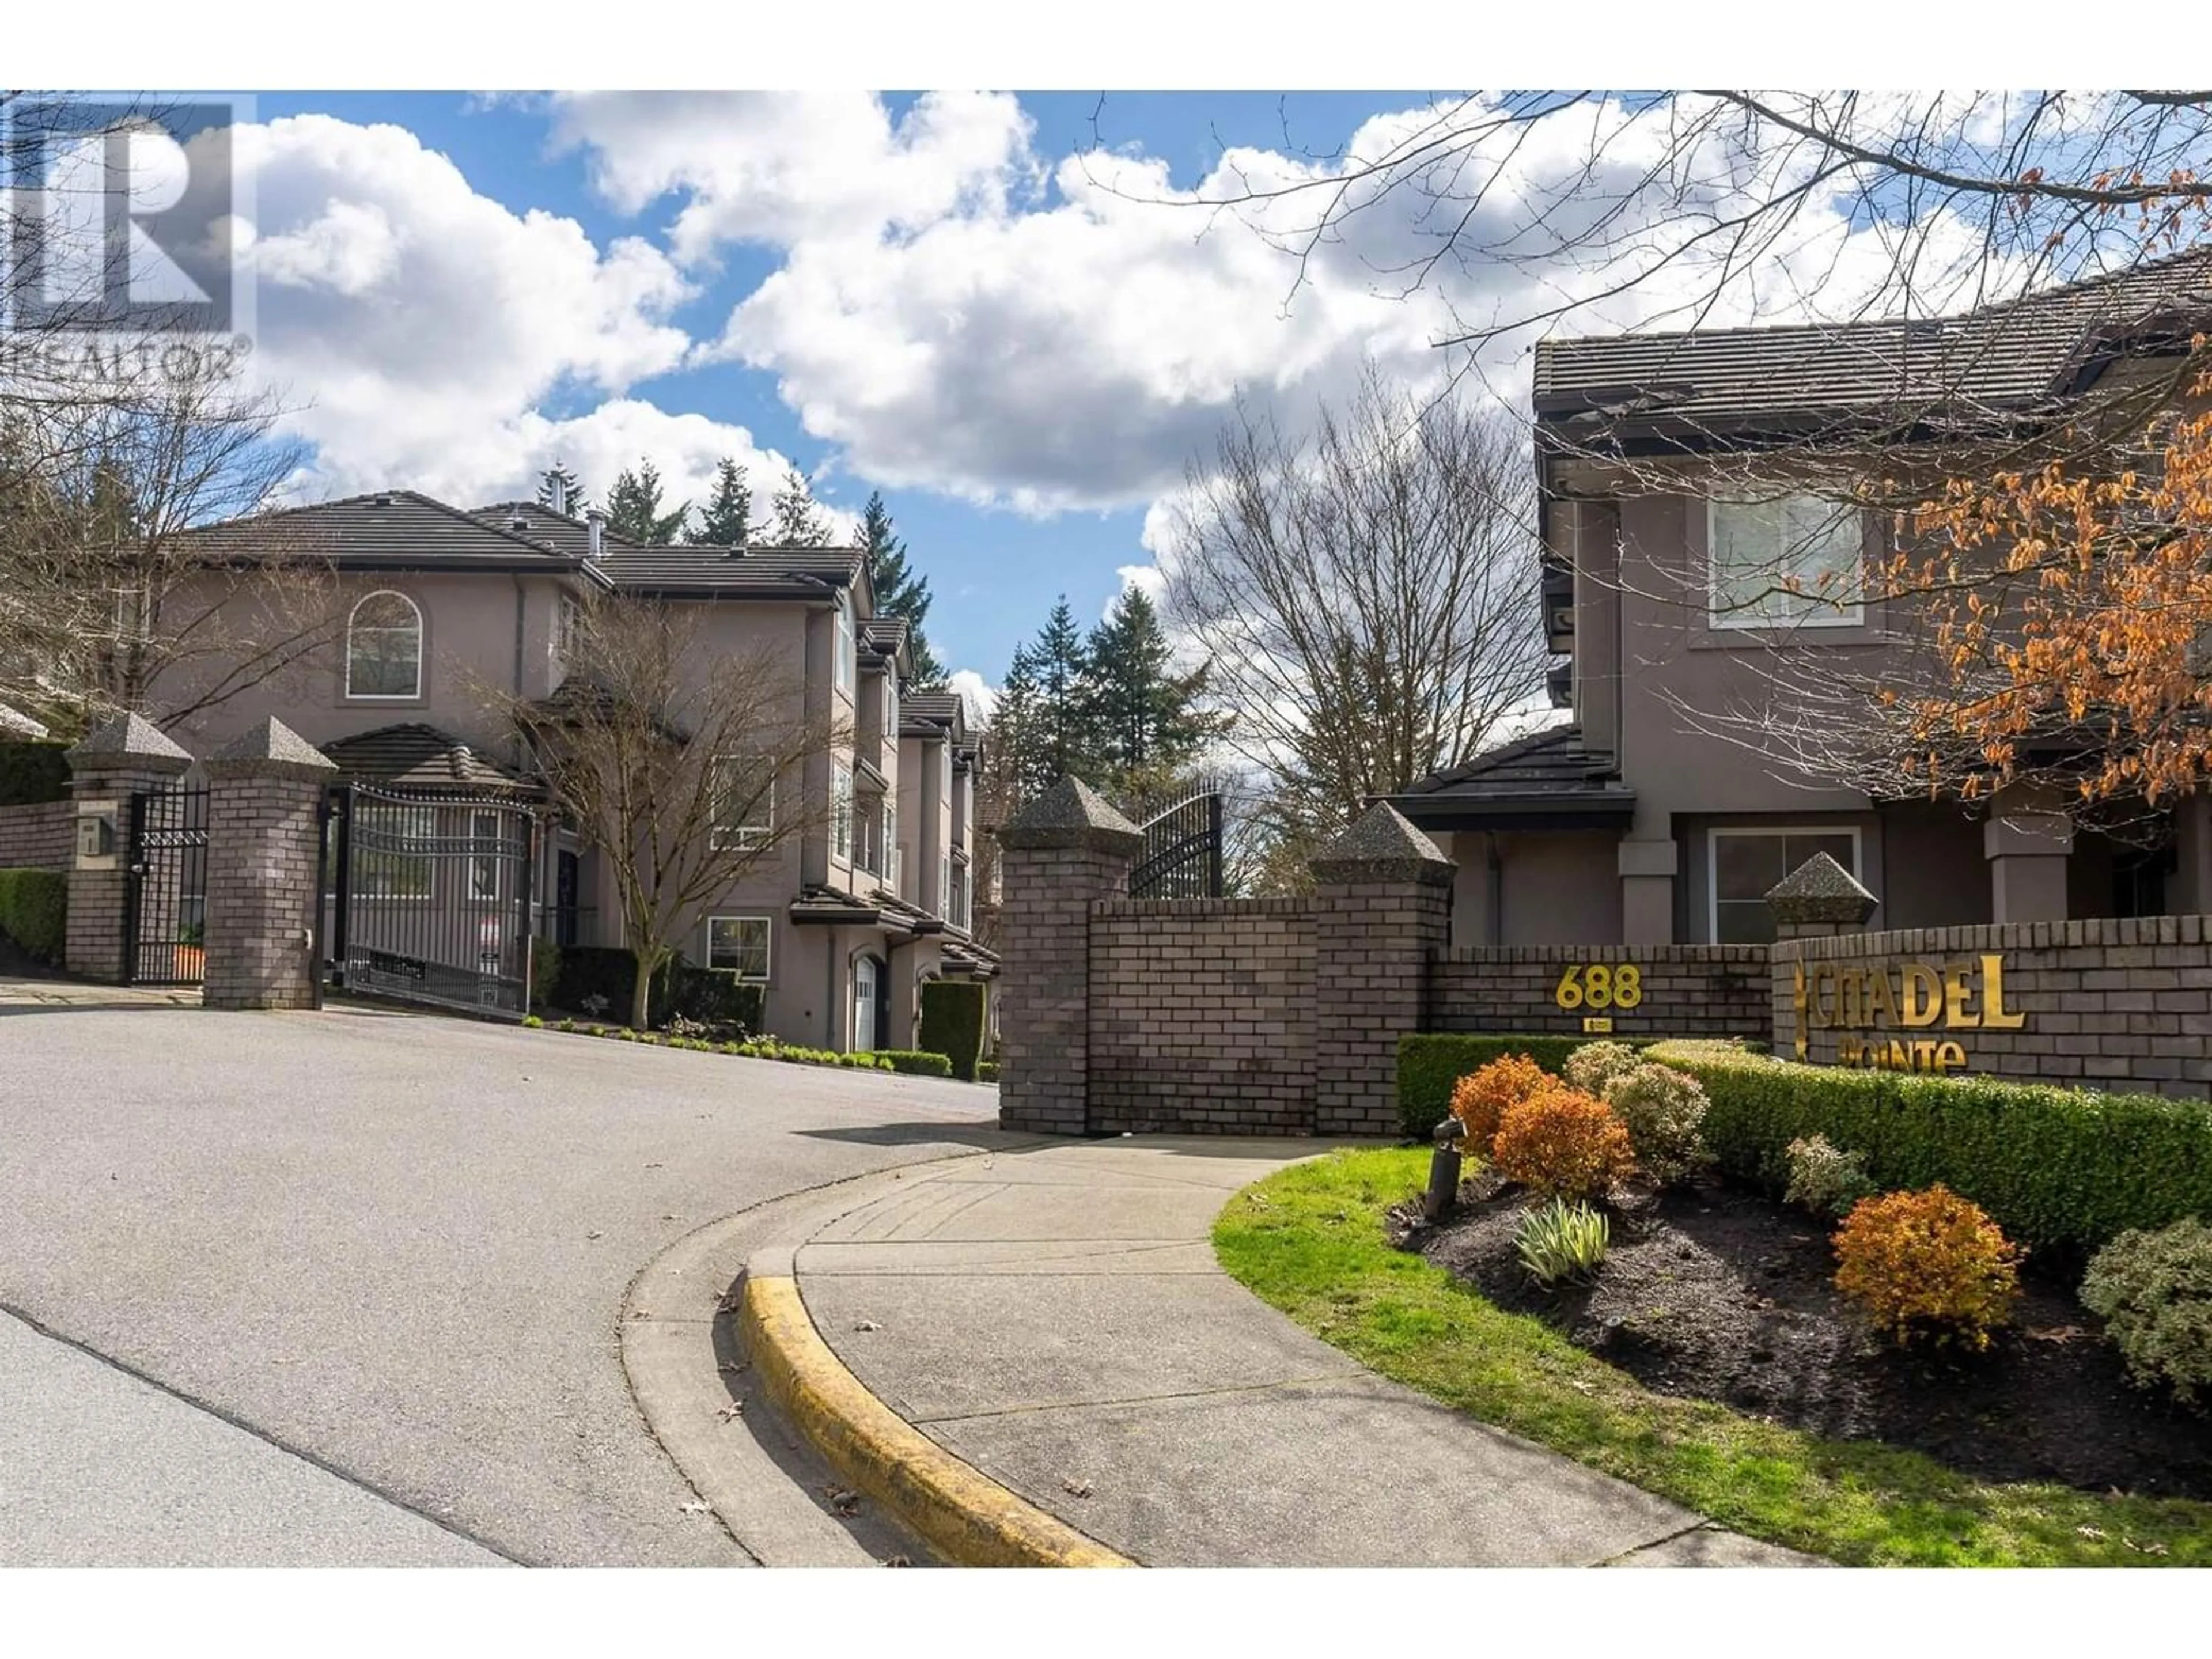 A pic from exterior of the house or condo for 22 688 CITADEL DRIVE, Port Coquitlam British Columbia V3C6M8